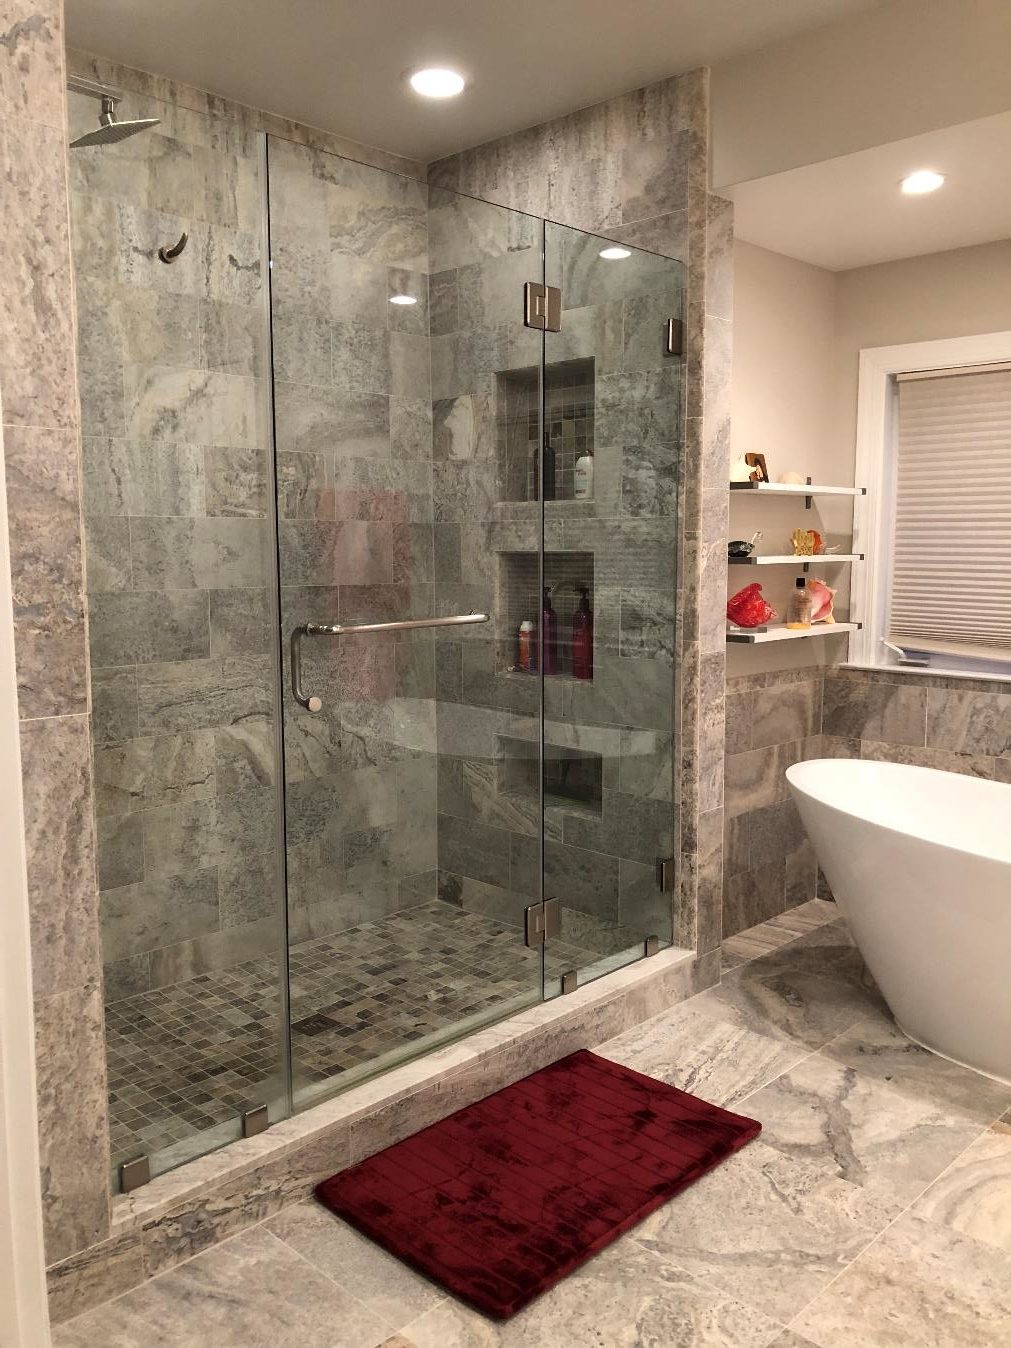 Complete bathroom remodeling with bath tub and shower room